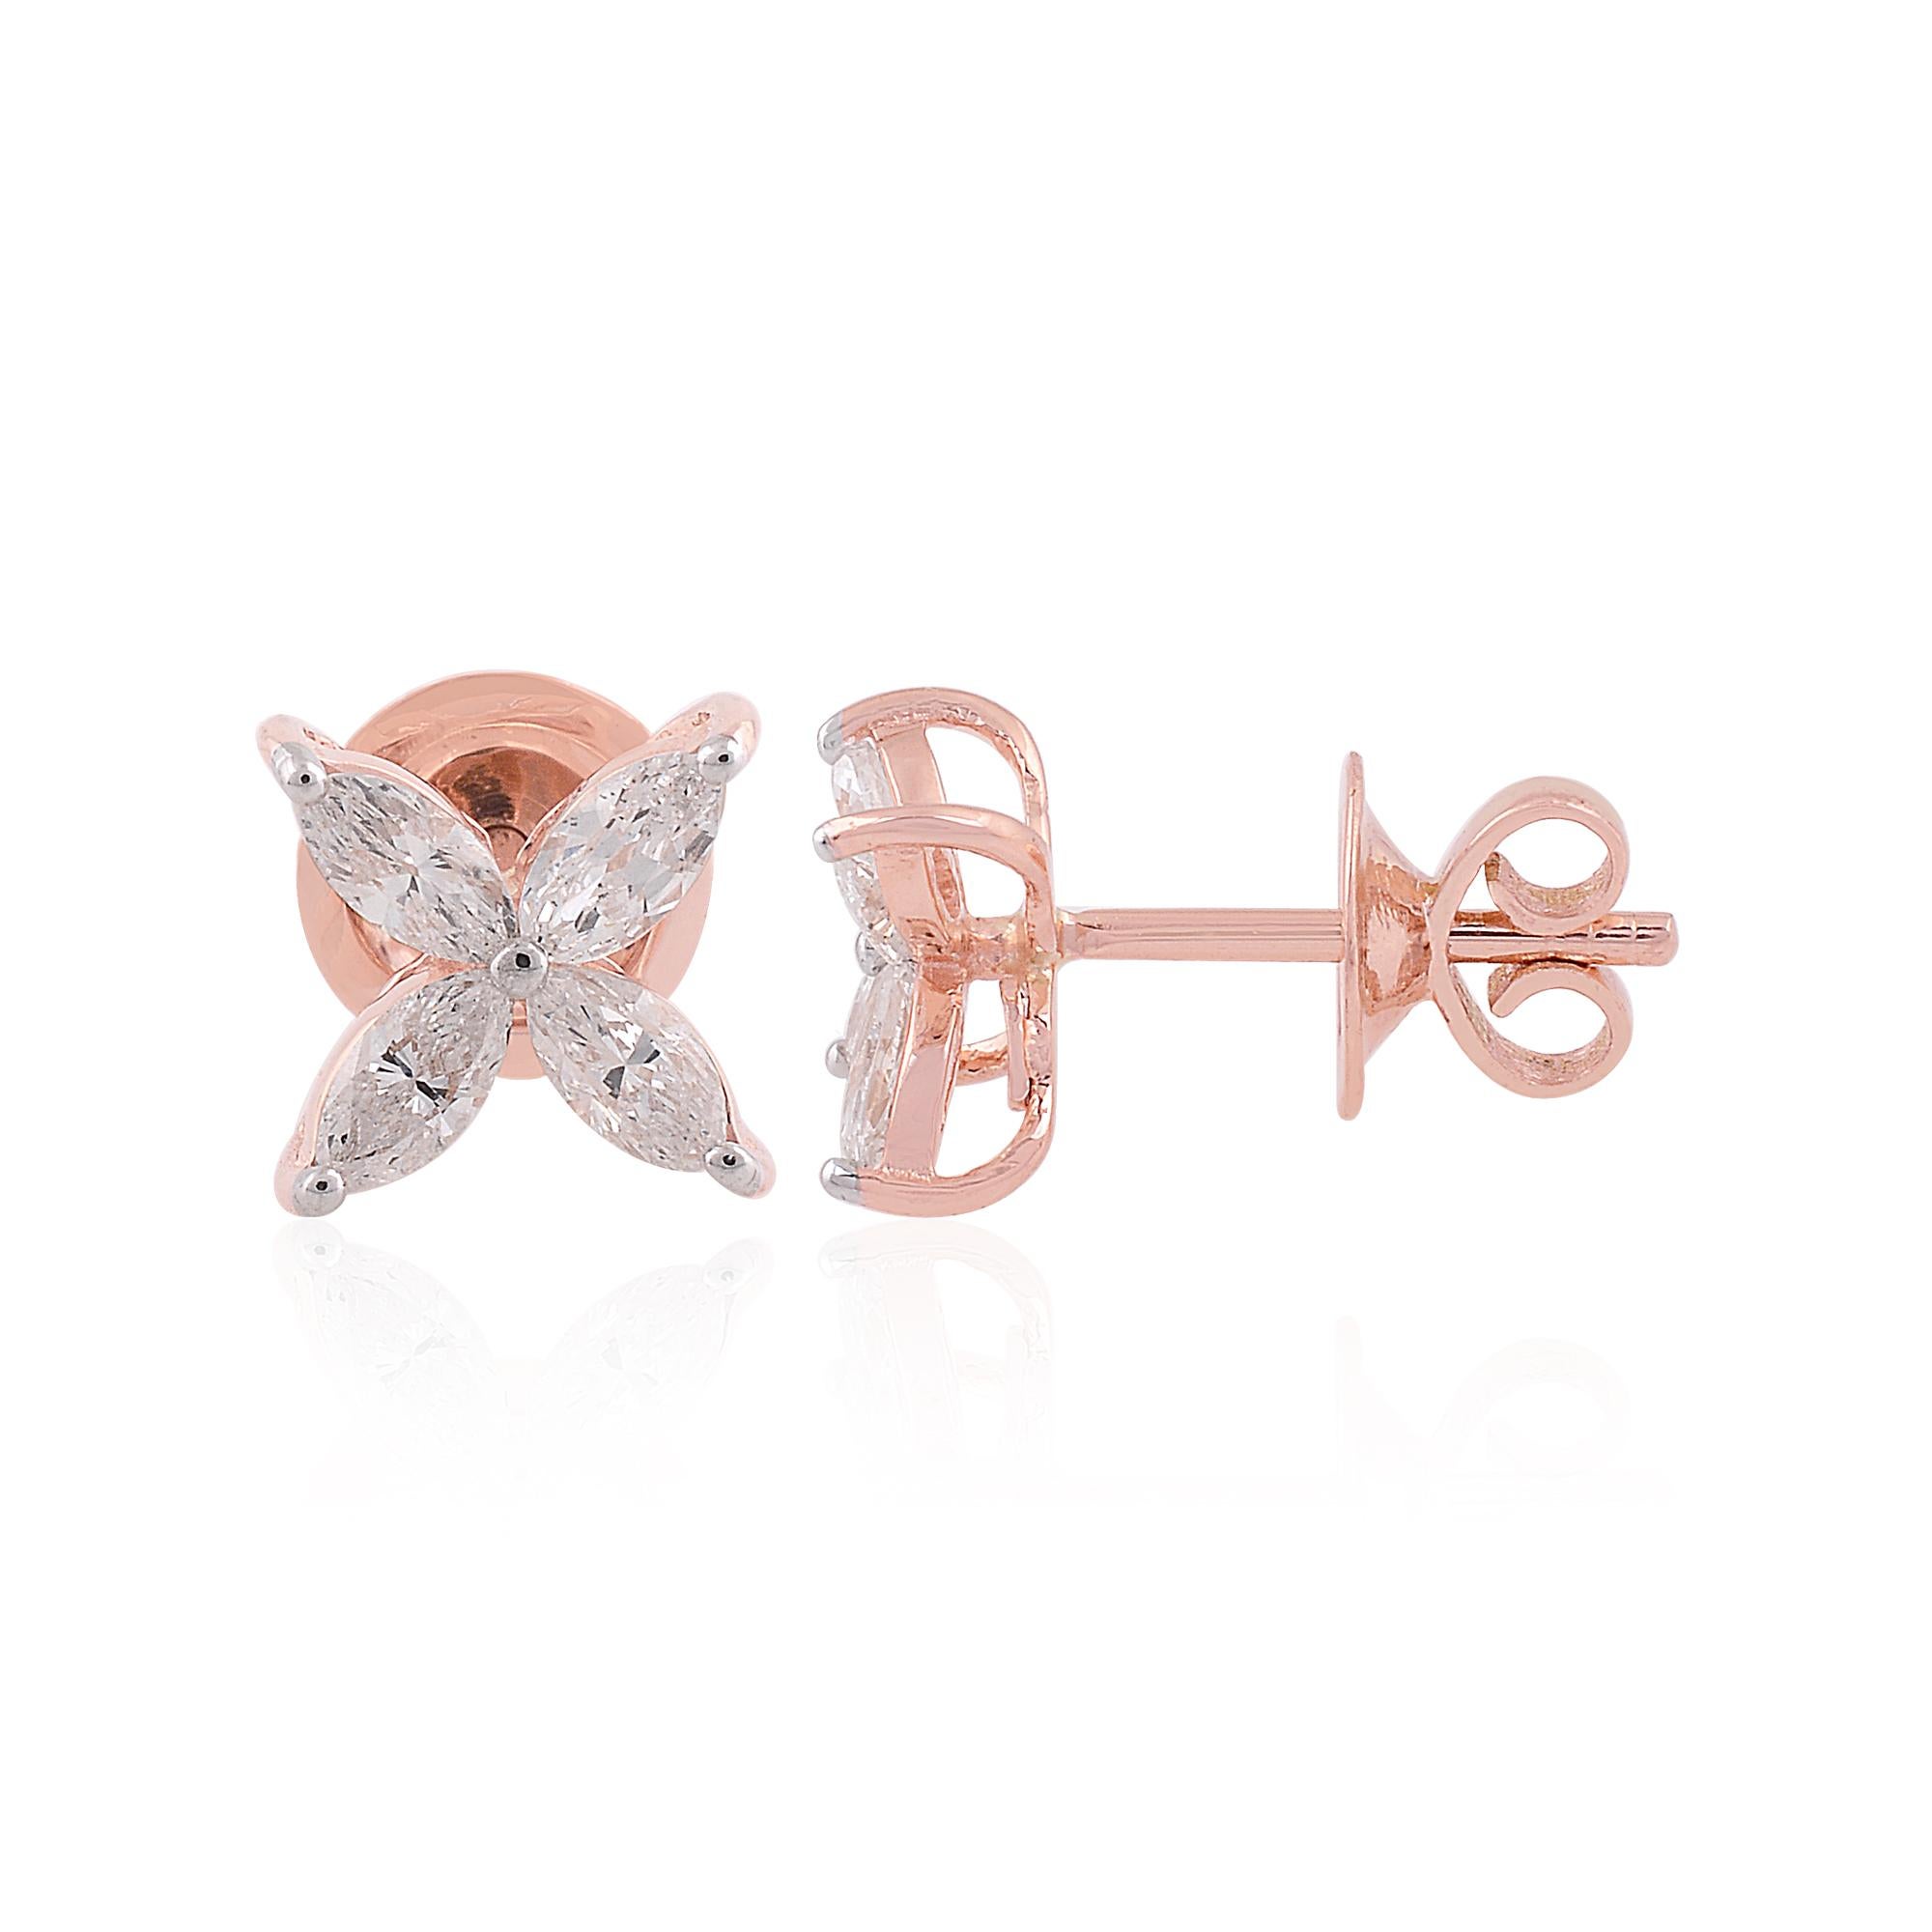 Modern SI Clarity HI Color Marquise Diamond Stud Earrings 18k Rose Gold Fine Jewelry For Sale